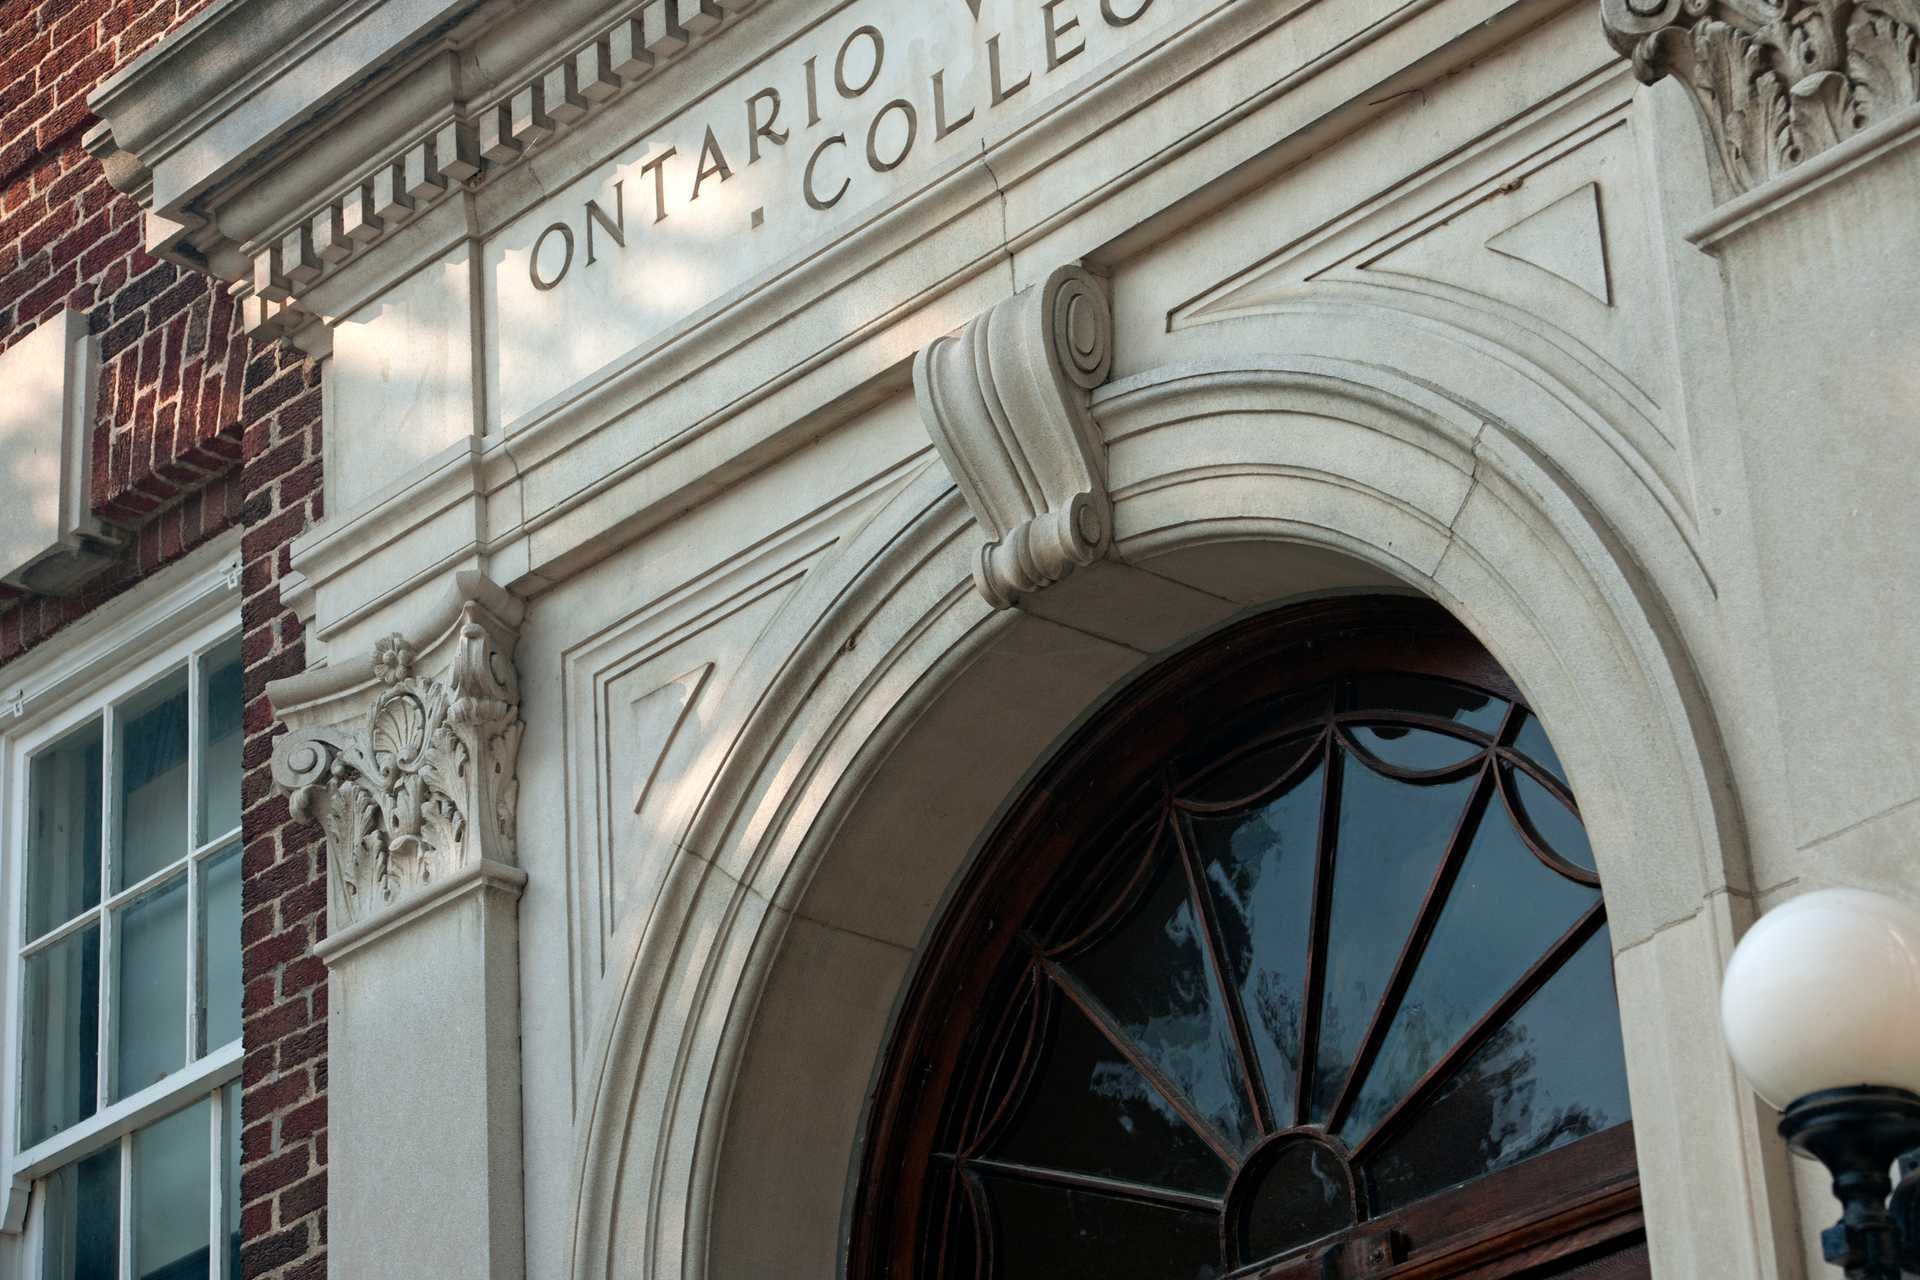 Image of front arch of the Ontario Vet College